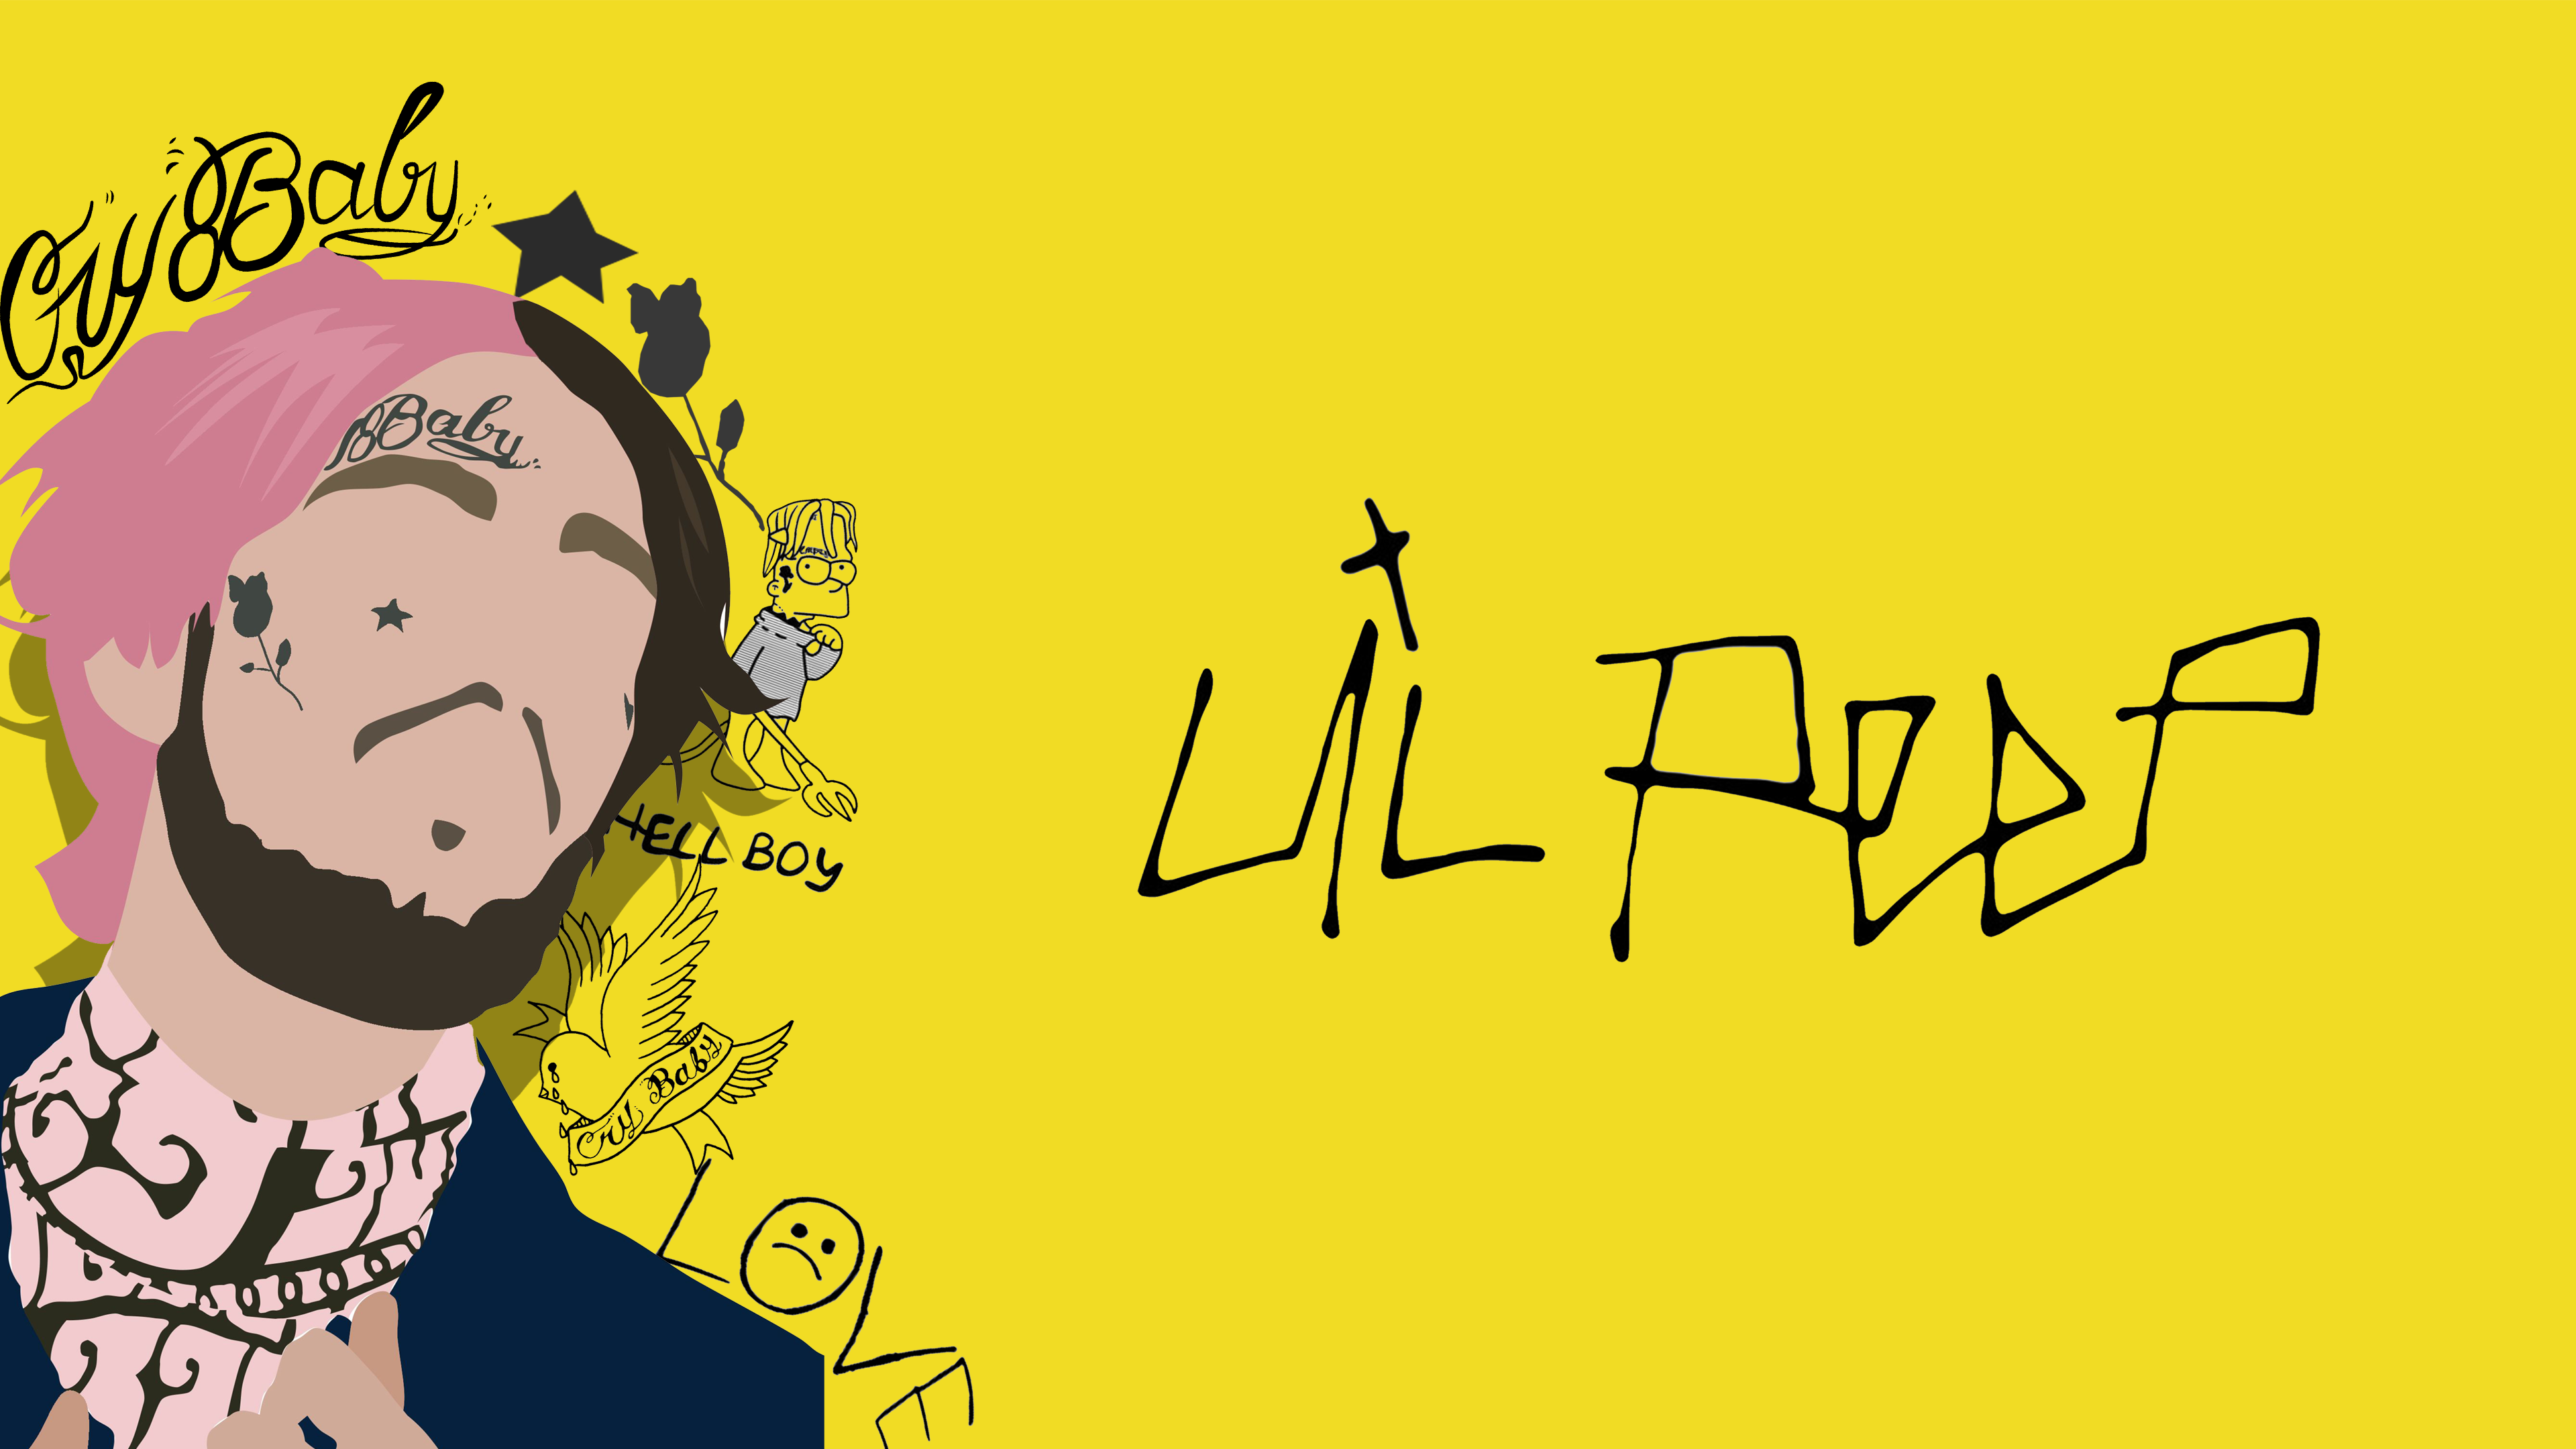 Lil Peep Cartoon Wallpapers posted by Ryan Tremblay